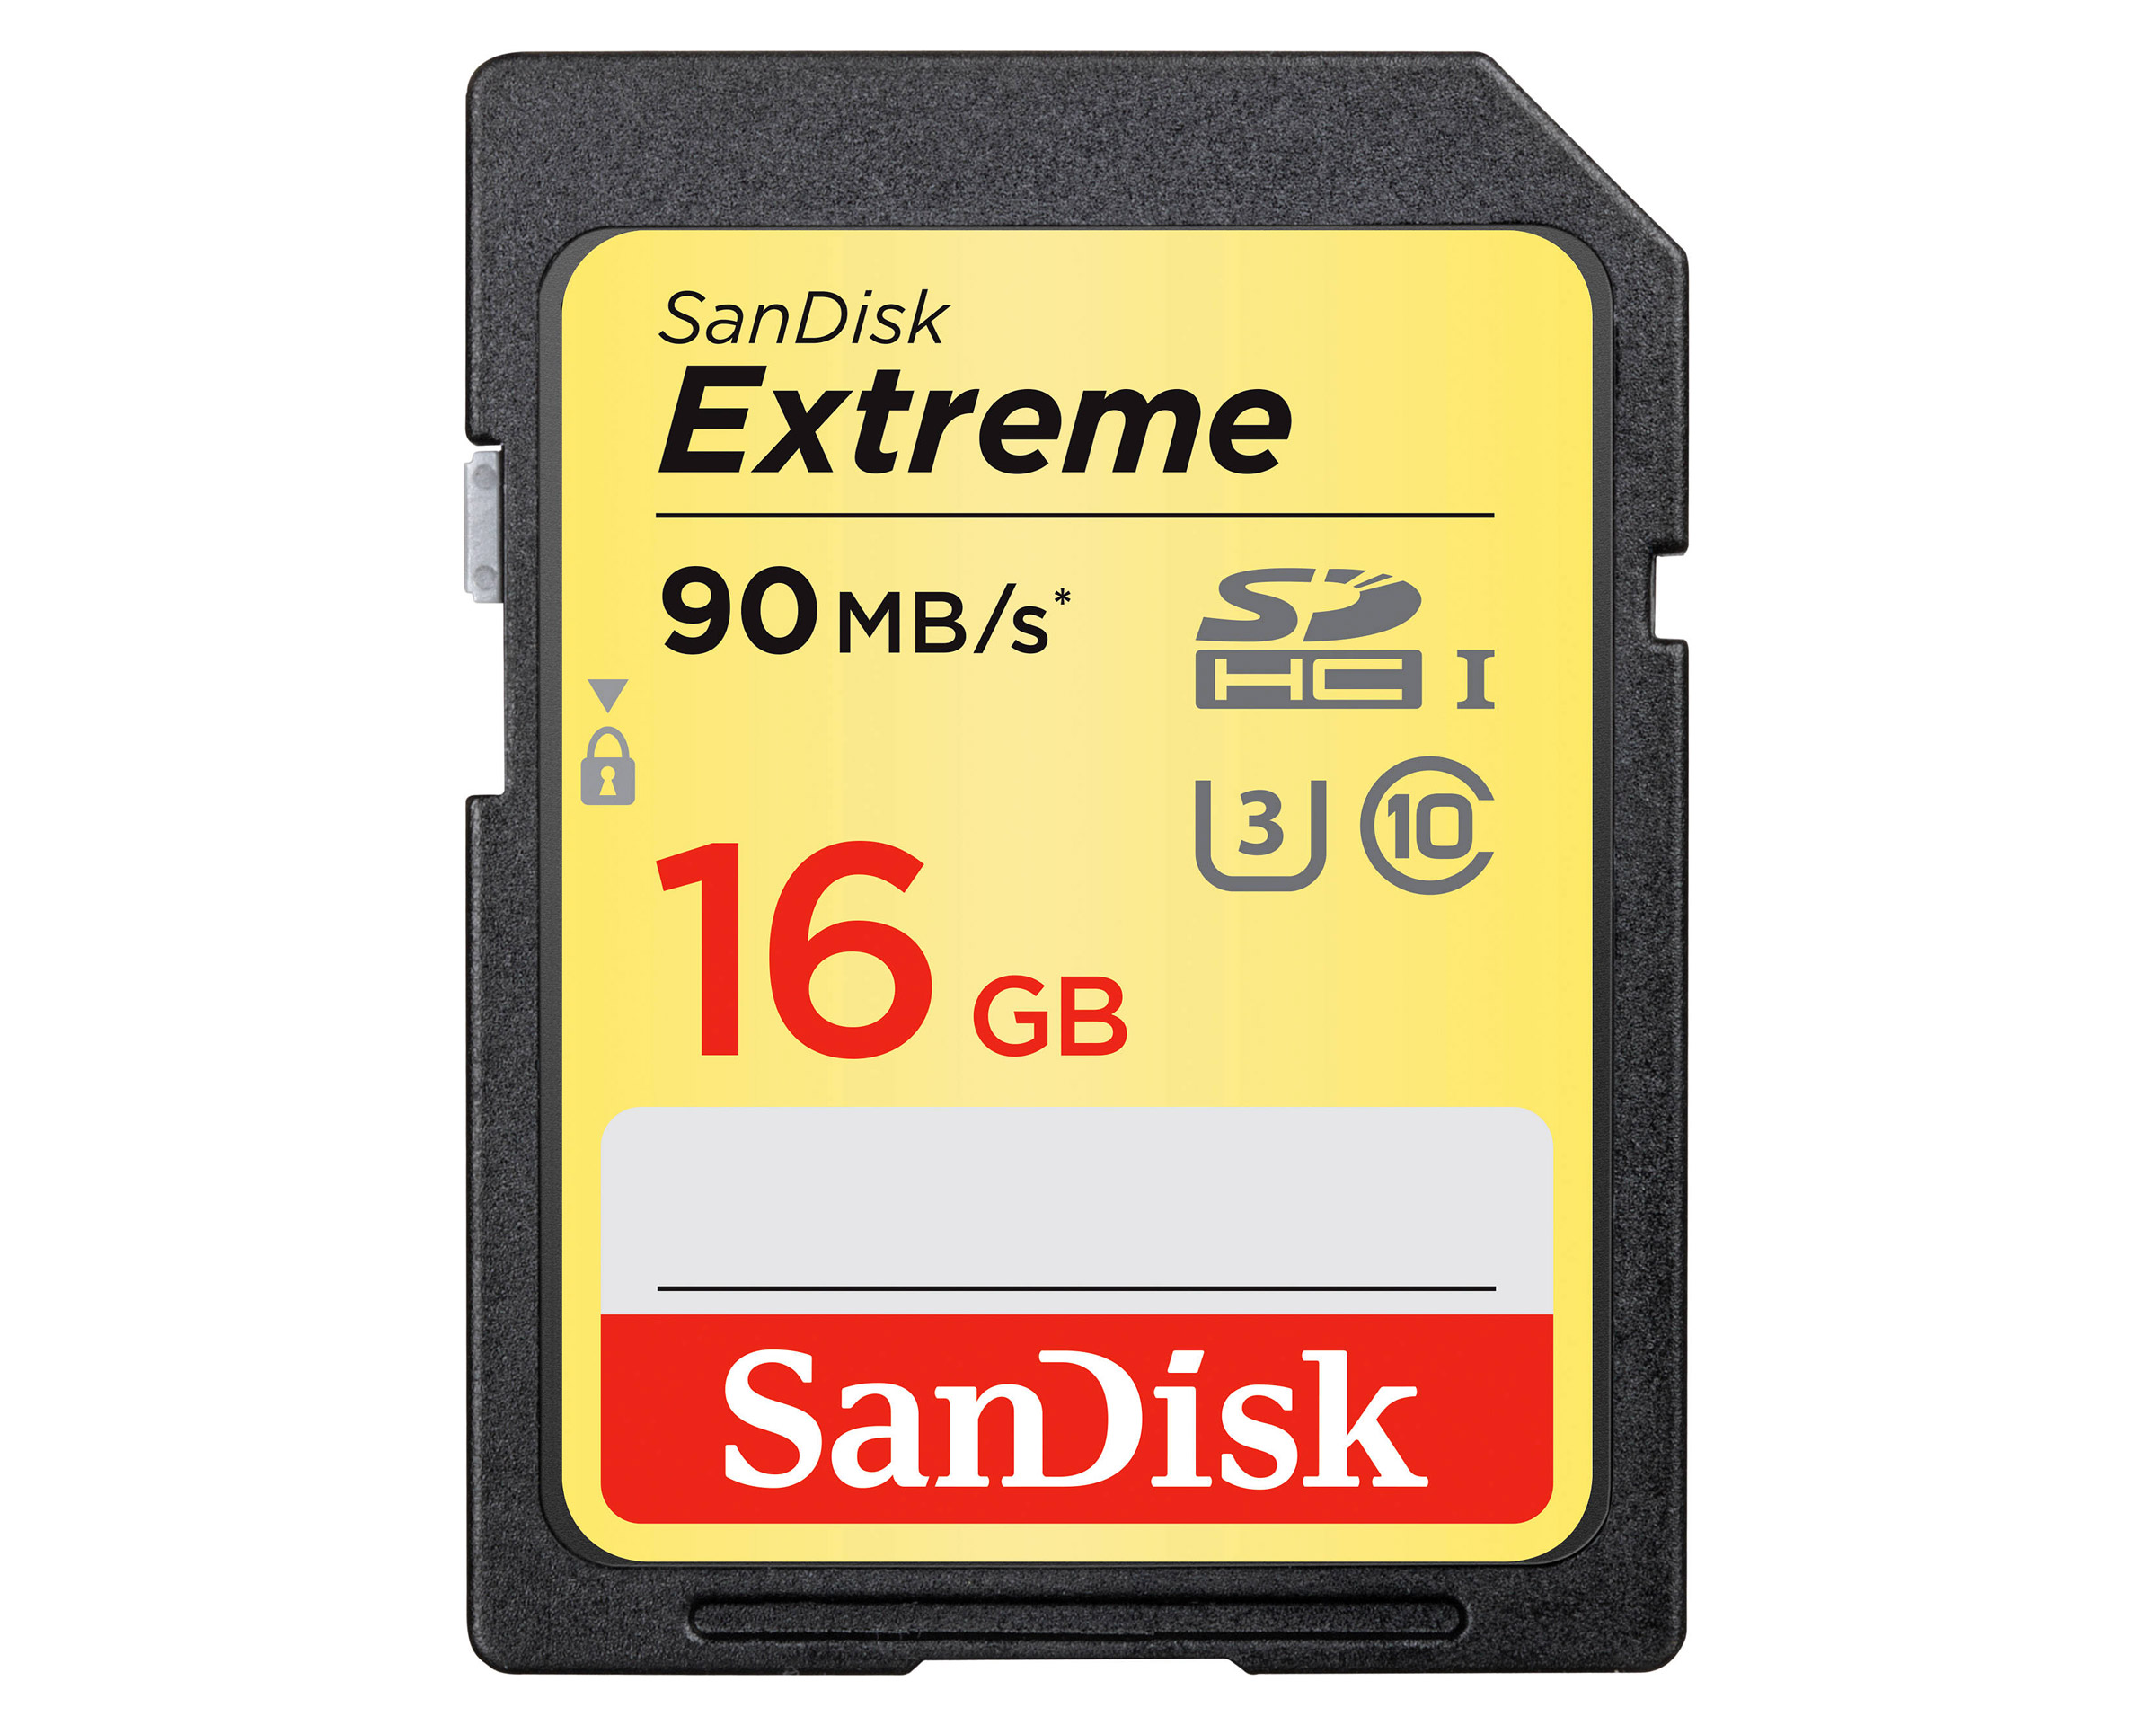 Sandisk Extreme SDHC 16 GB (90 MB/s)